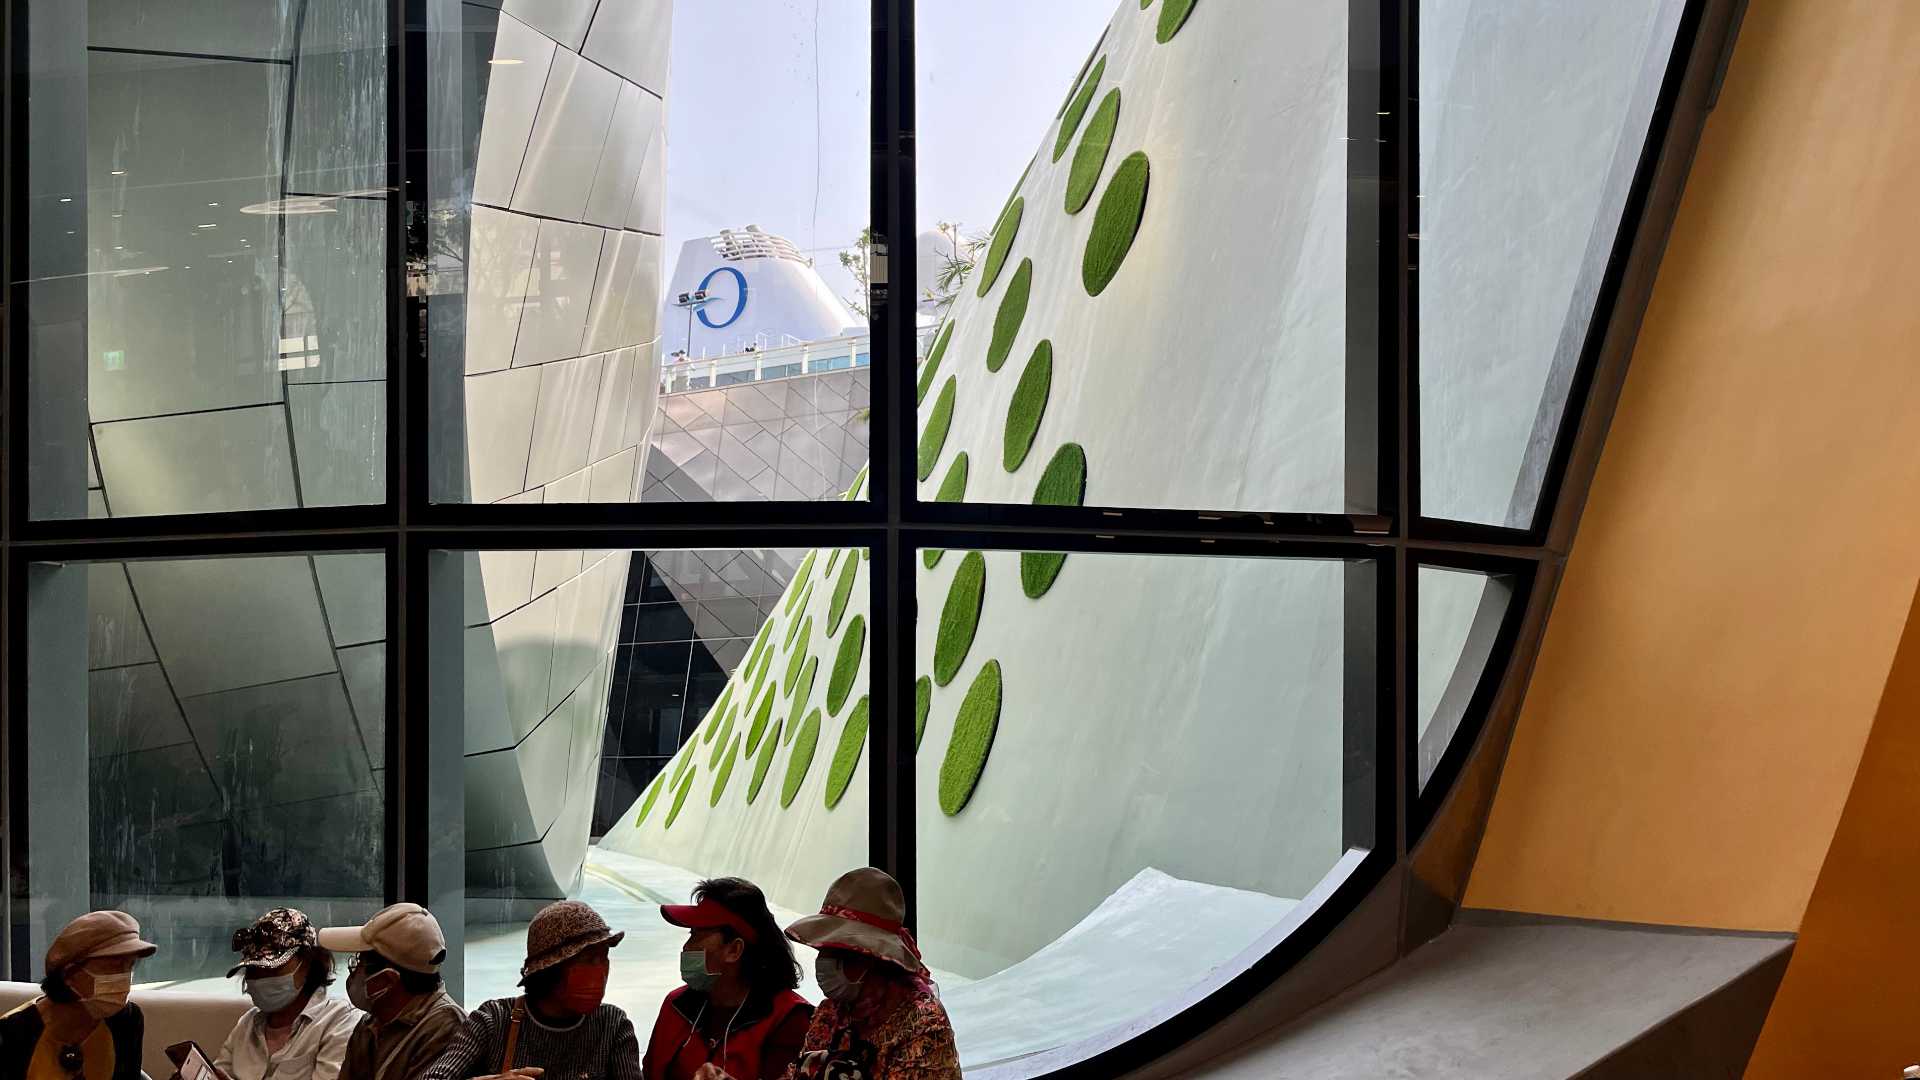 Six elderly women sit in front of a large window. They are all wearing face masks. Outside the window are the curved exterior walls, one covered in circular patches of grass, and the funnel of the Nautica cruise ship.